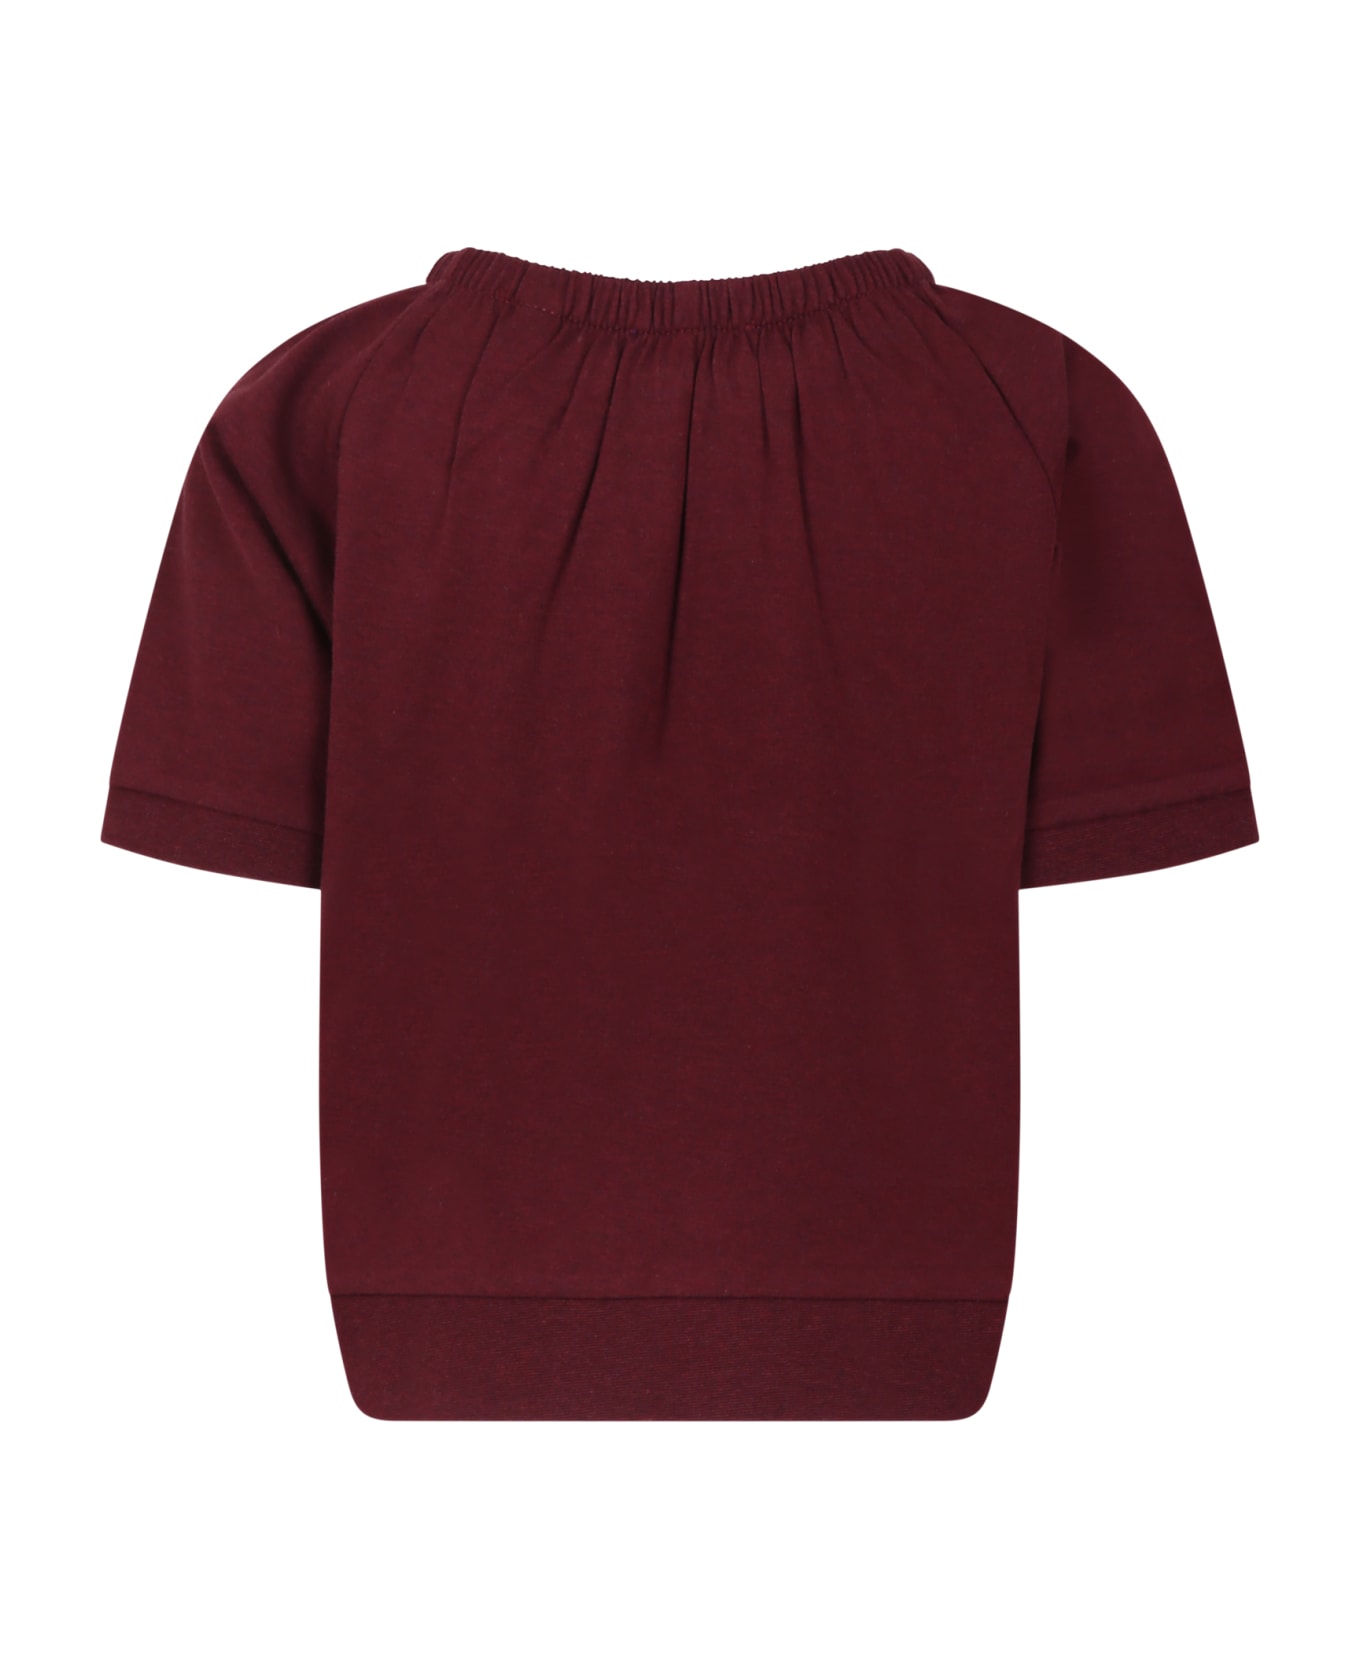 Burberry Sweater For Girl With Iconic Logo - Bordeaux